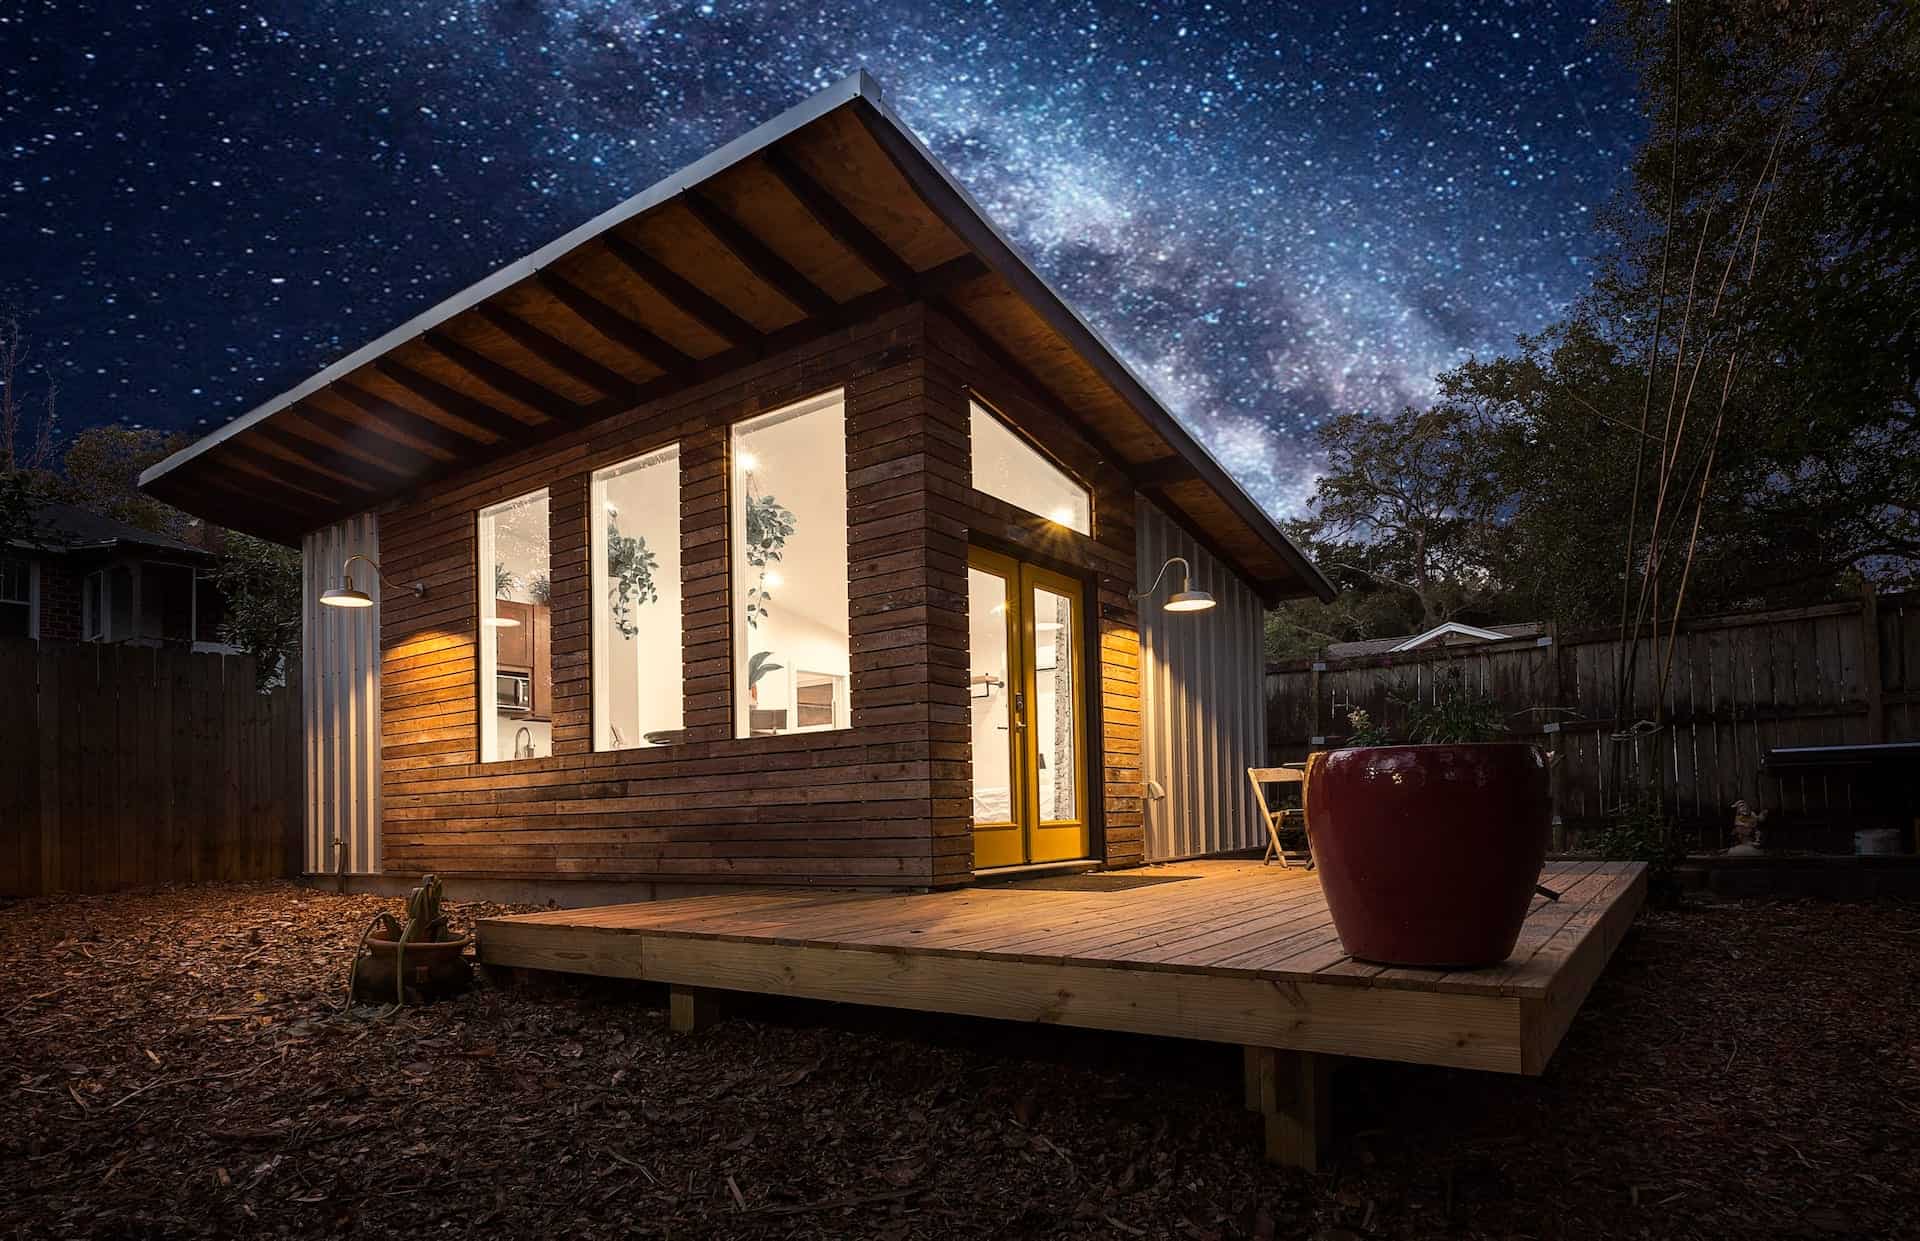 20 Best Airbnbs In Florida Cabins, Treehouses, & More   Florida ...